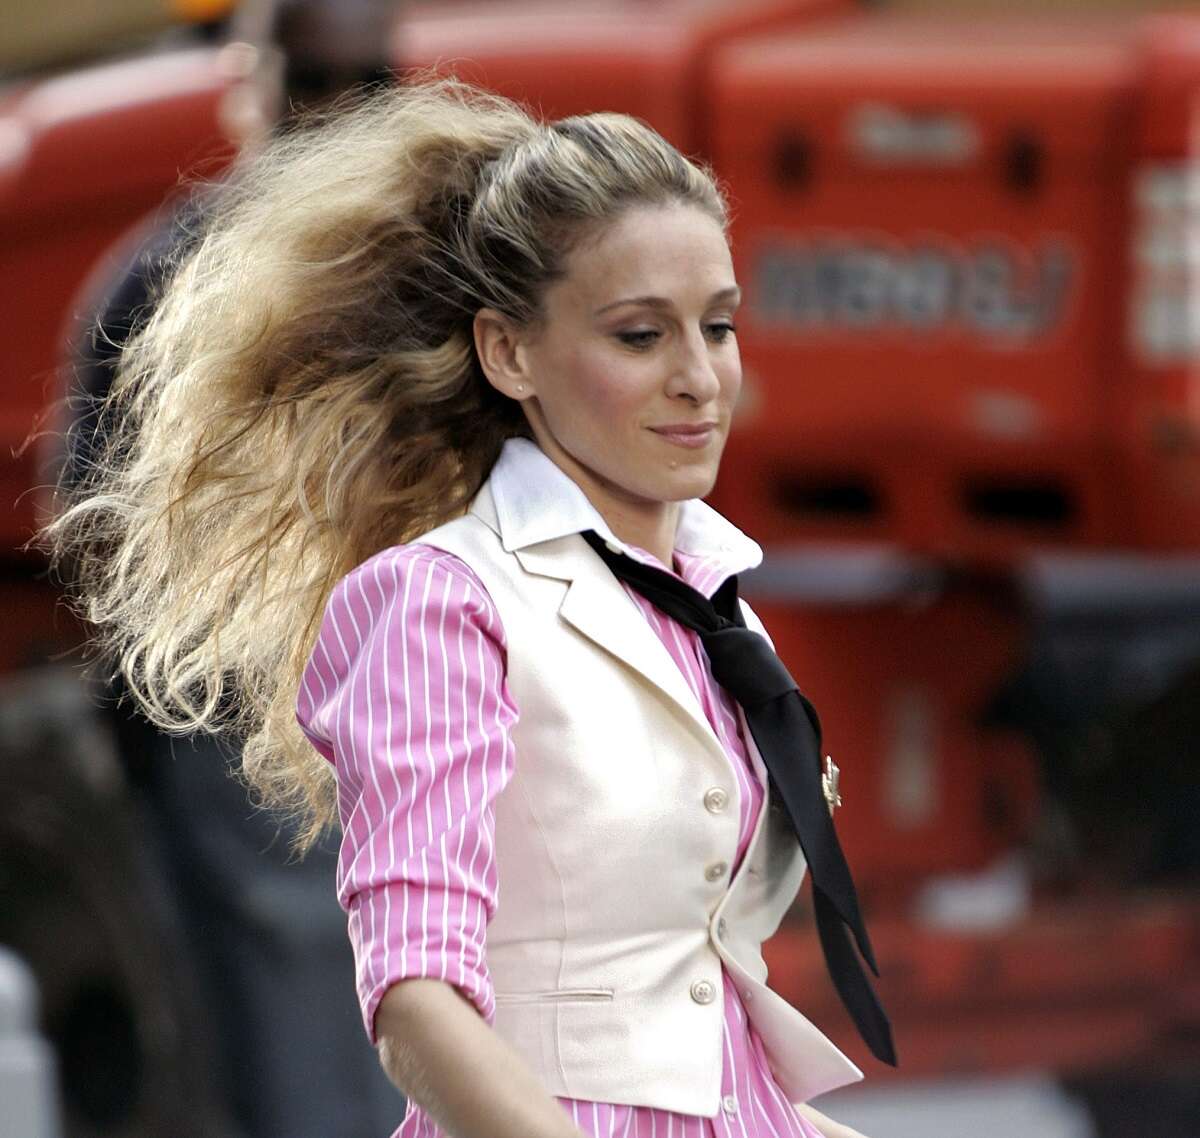 Carrie Bradshaw walks through Manhattan while filming of 'Sex and the City: The Movie,' wearing a white blazer and pink striped button-up